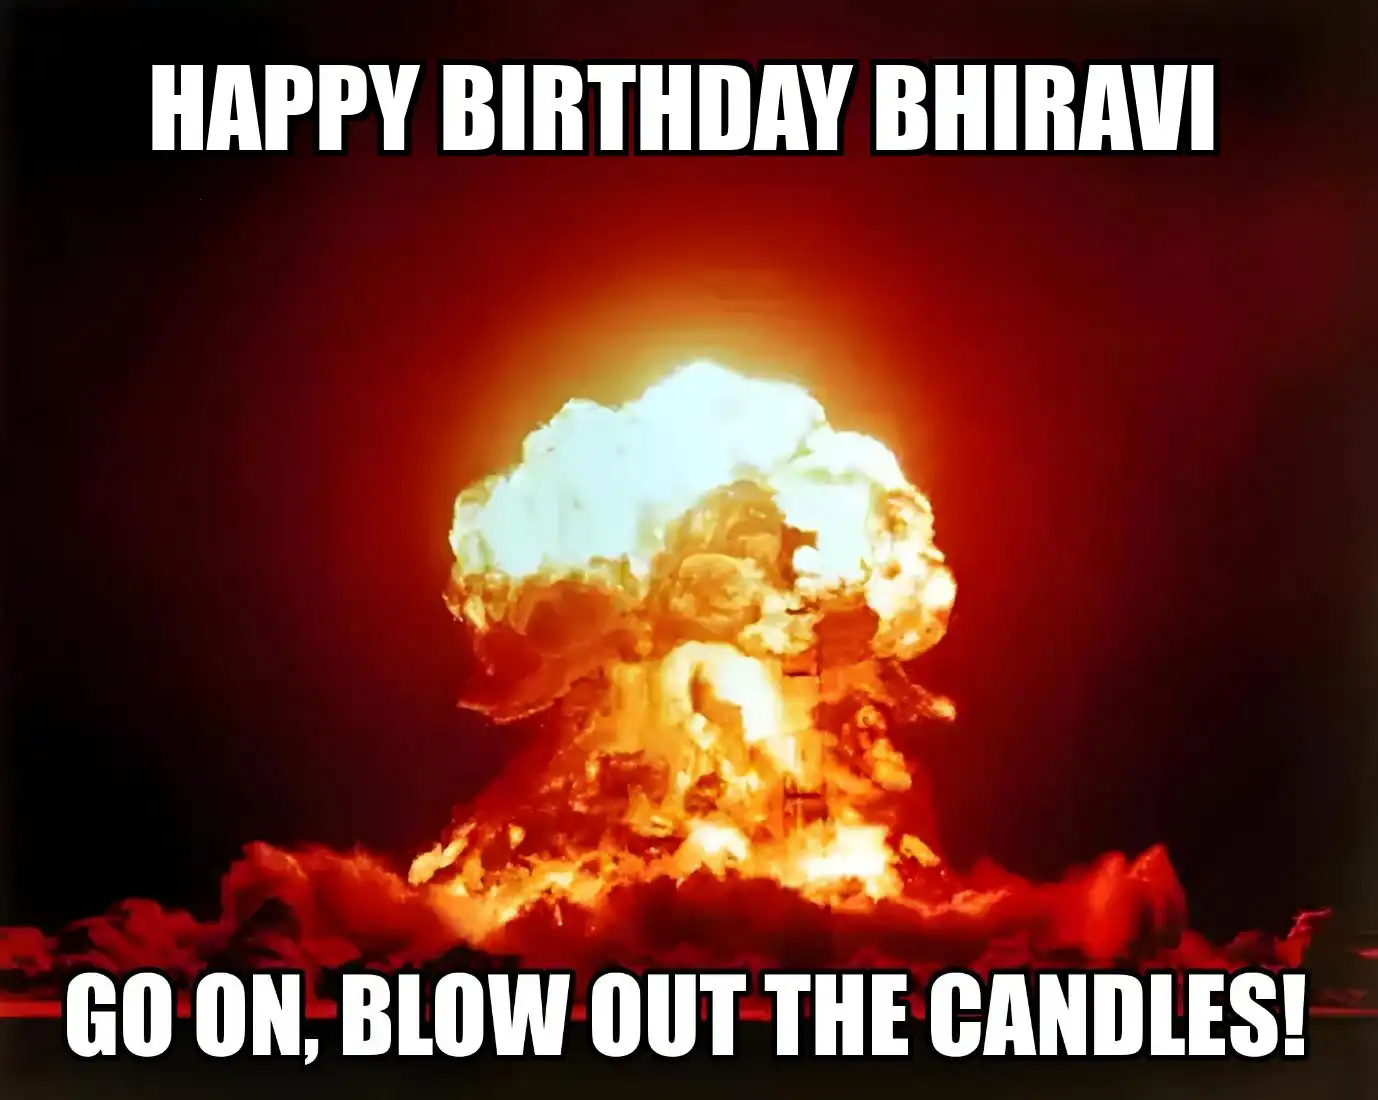 Happy Birthday Bhiravi Go On Blow Out The Candles Meme